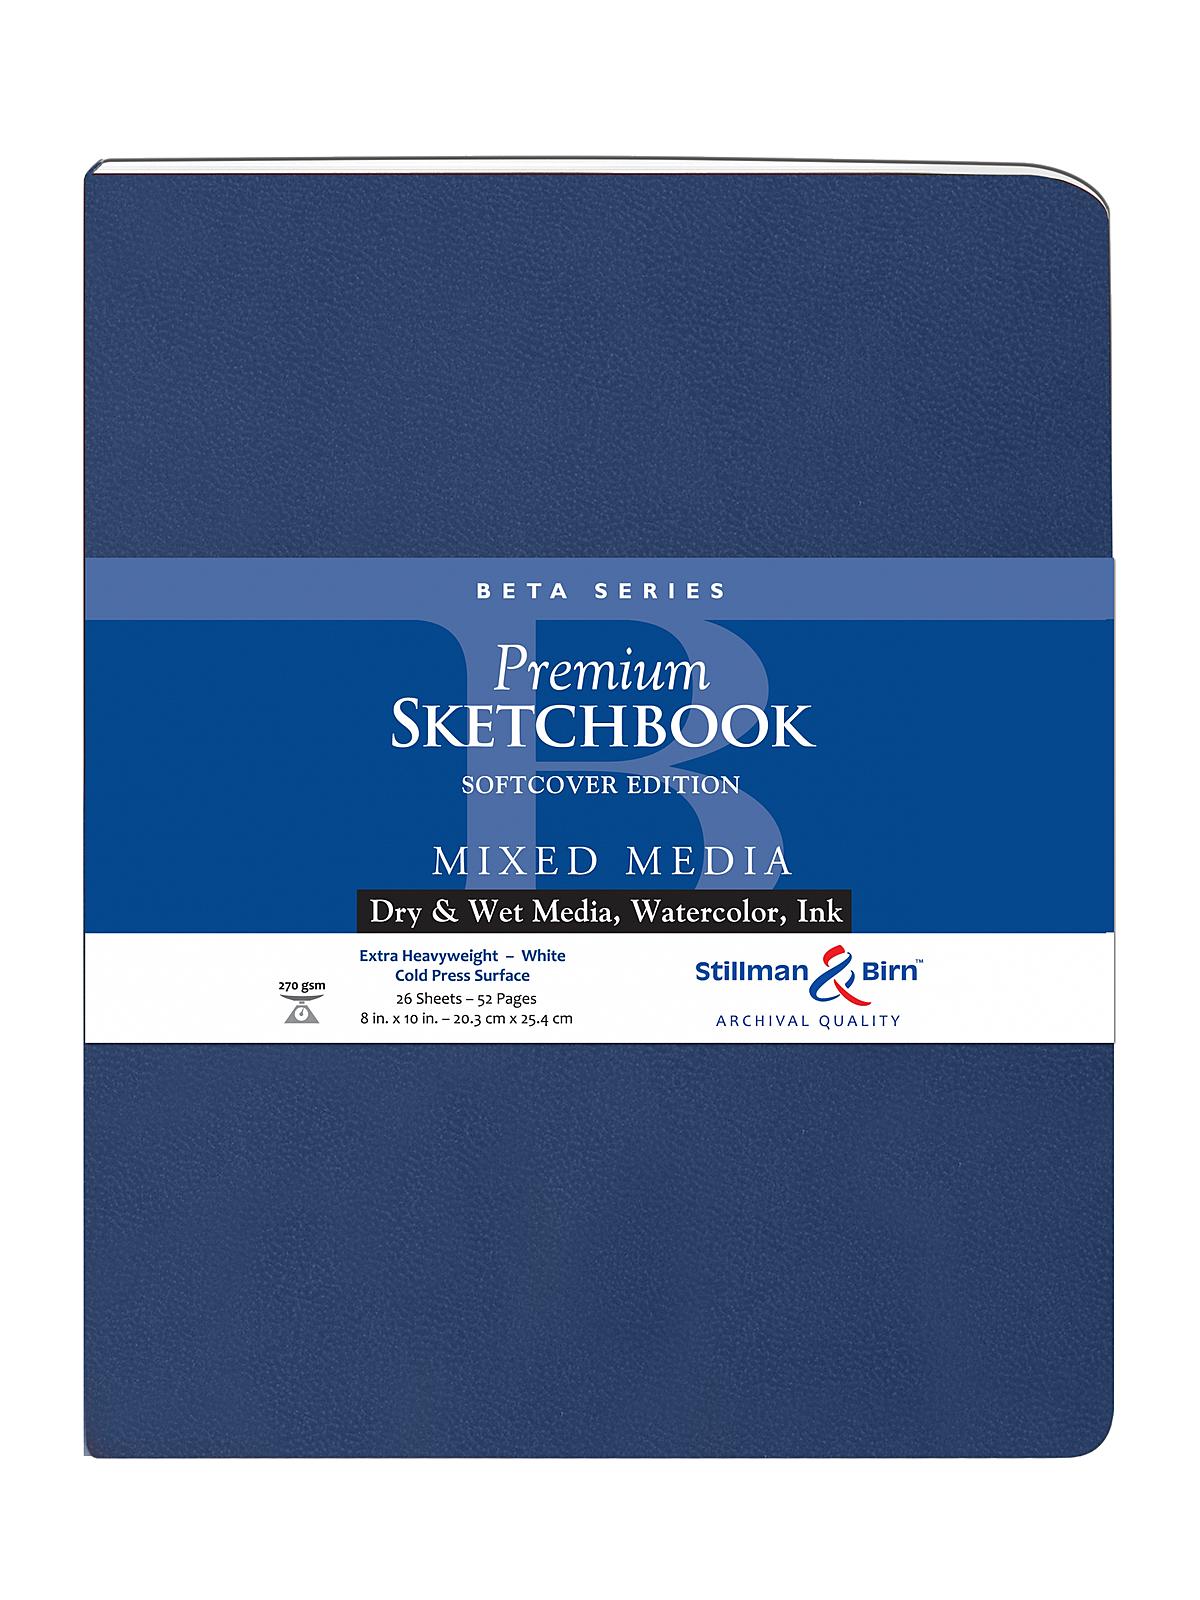 Beta Series Softcover Sketchbook 8 In. X 10 In. Portrait 56 Pages